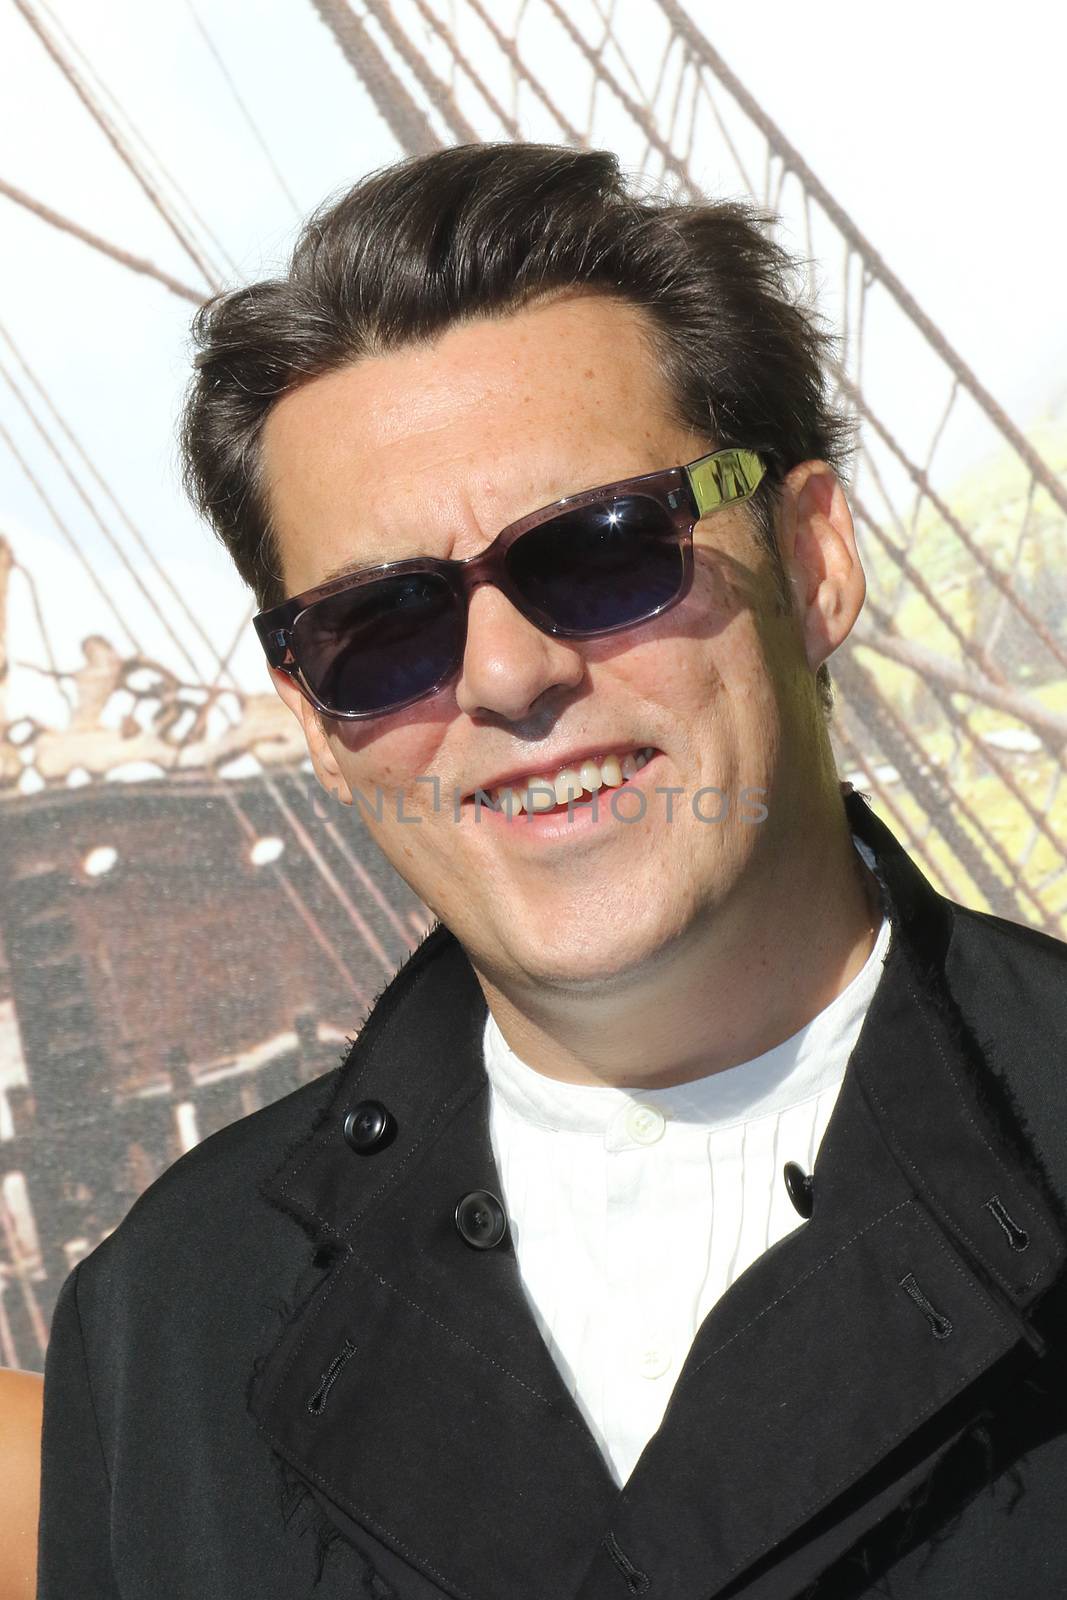 UNITED KINGDOM, London: Joe Wright was among the stars to hit the red carpet in London for his new film Pan, a prequel to J.M. Barrie's classic Peter Pan stories, on September 20, 2015.